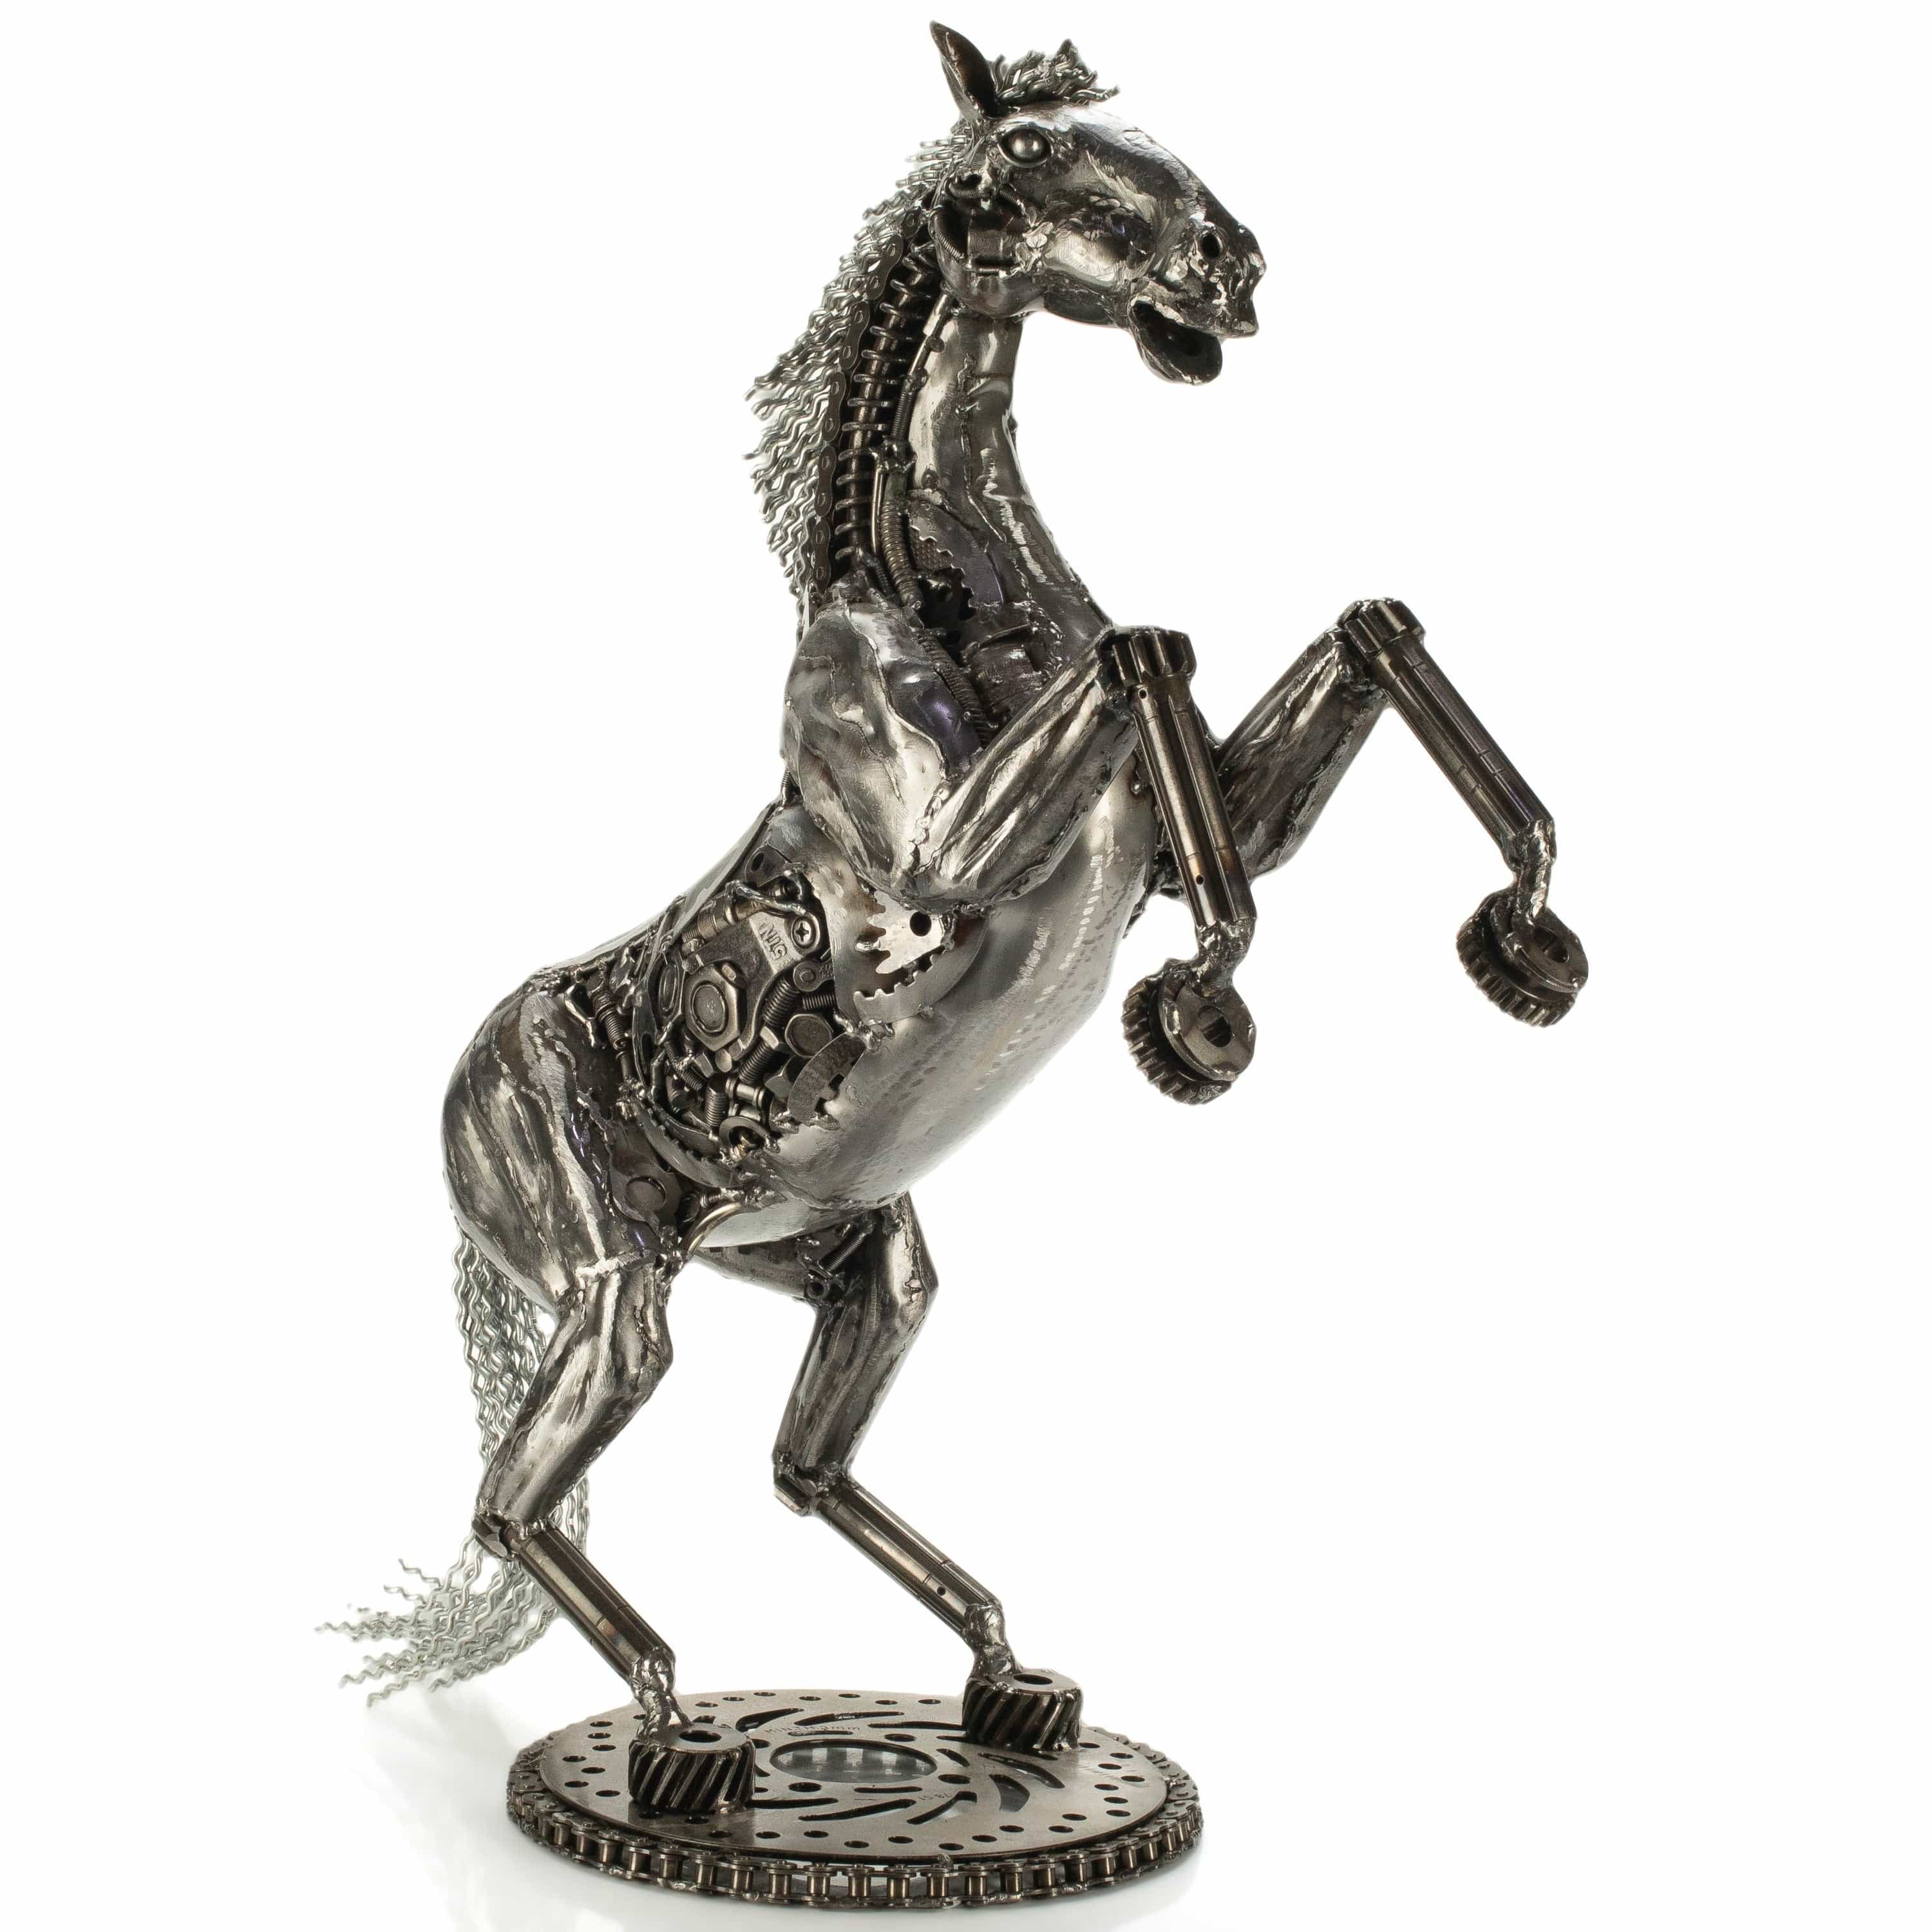 KALIFANO Recycled Metal Art 29" Jumping Horse Inspired Recycled Metal Art Sculpture RMS-JHS74x53-PK